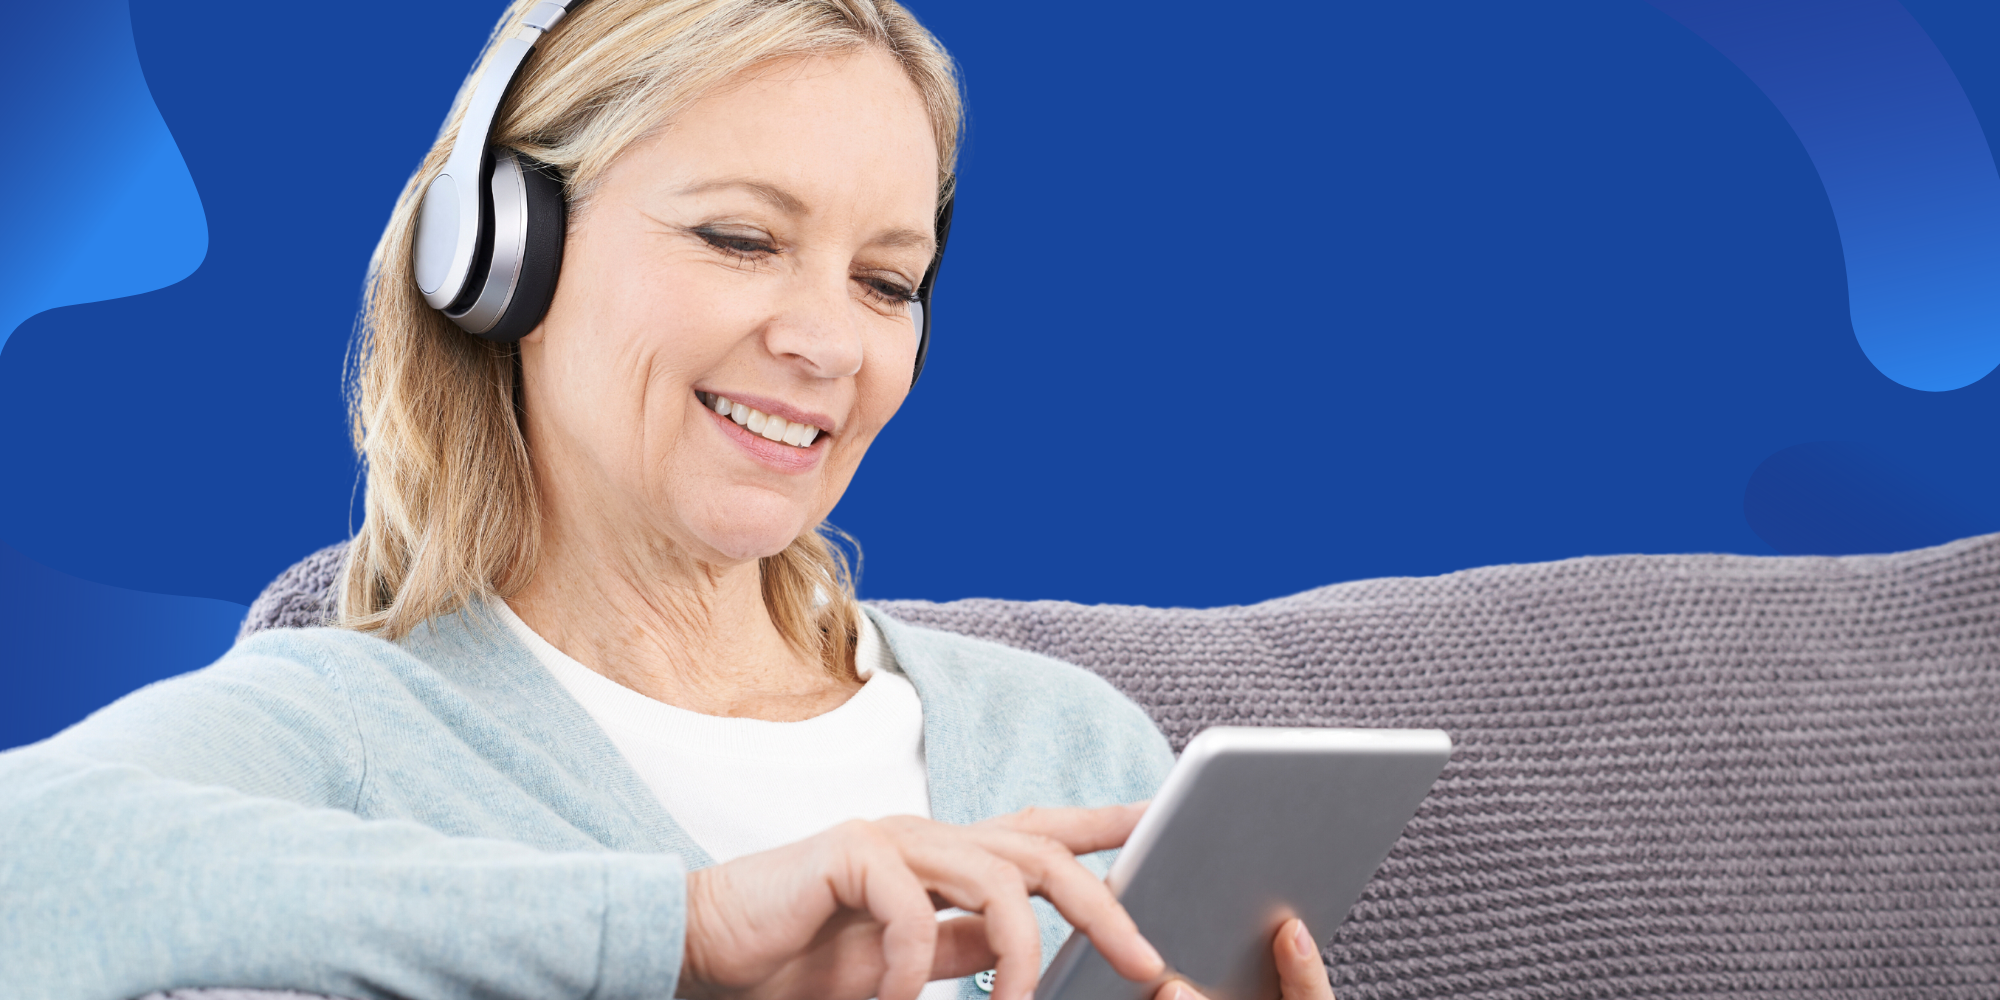 Middle aged woman reading on tablet with headphones.